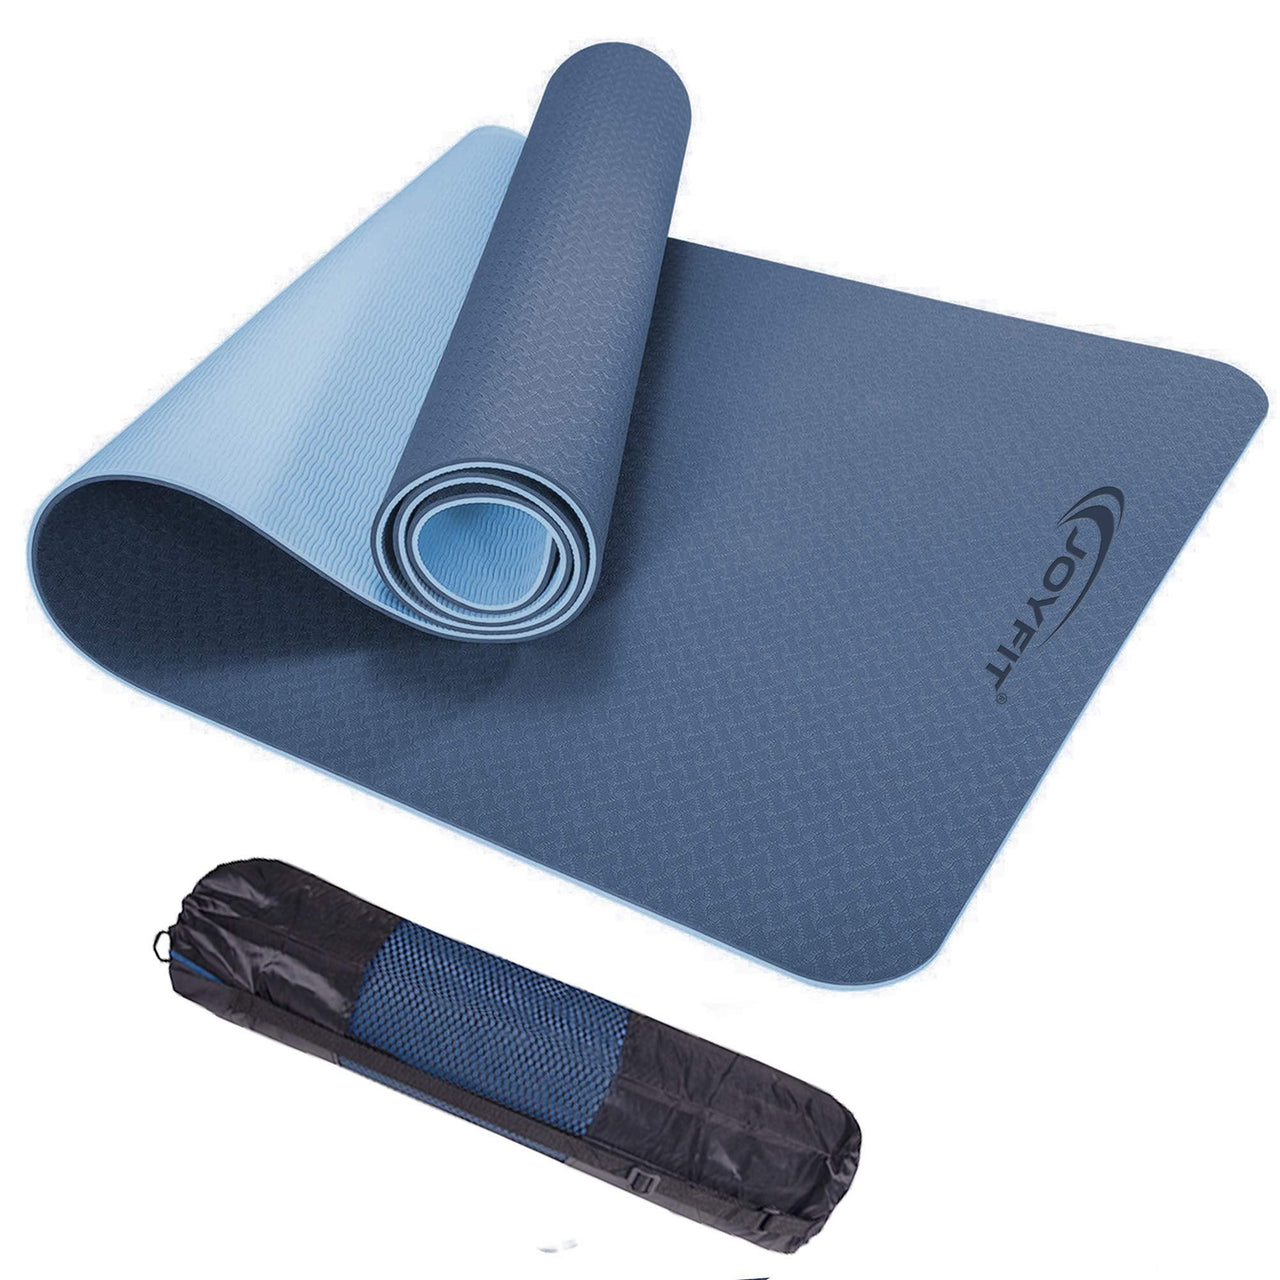 Tpe Yoga Mat 10mm, For Yoga,Exercise at Rs 450/piece in Gandhidham